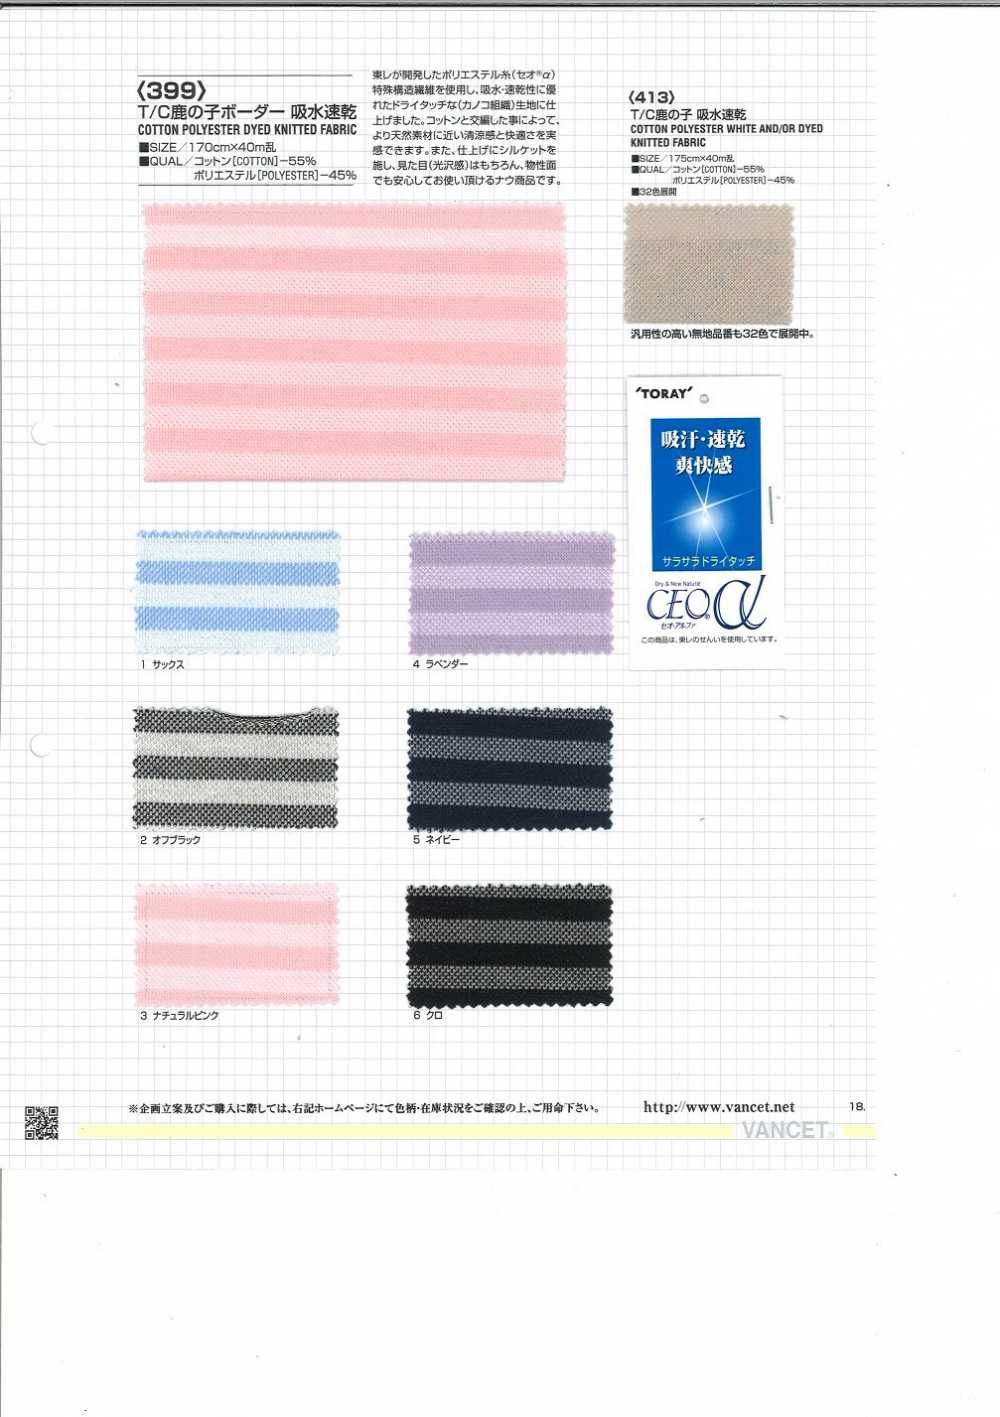 399 T / C Moss Stitch Horizontal Stripes Water Absorption And Quick Drying[Textile / Fabric] VANCET